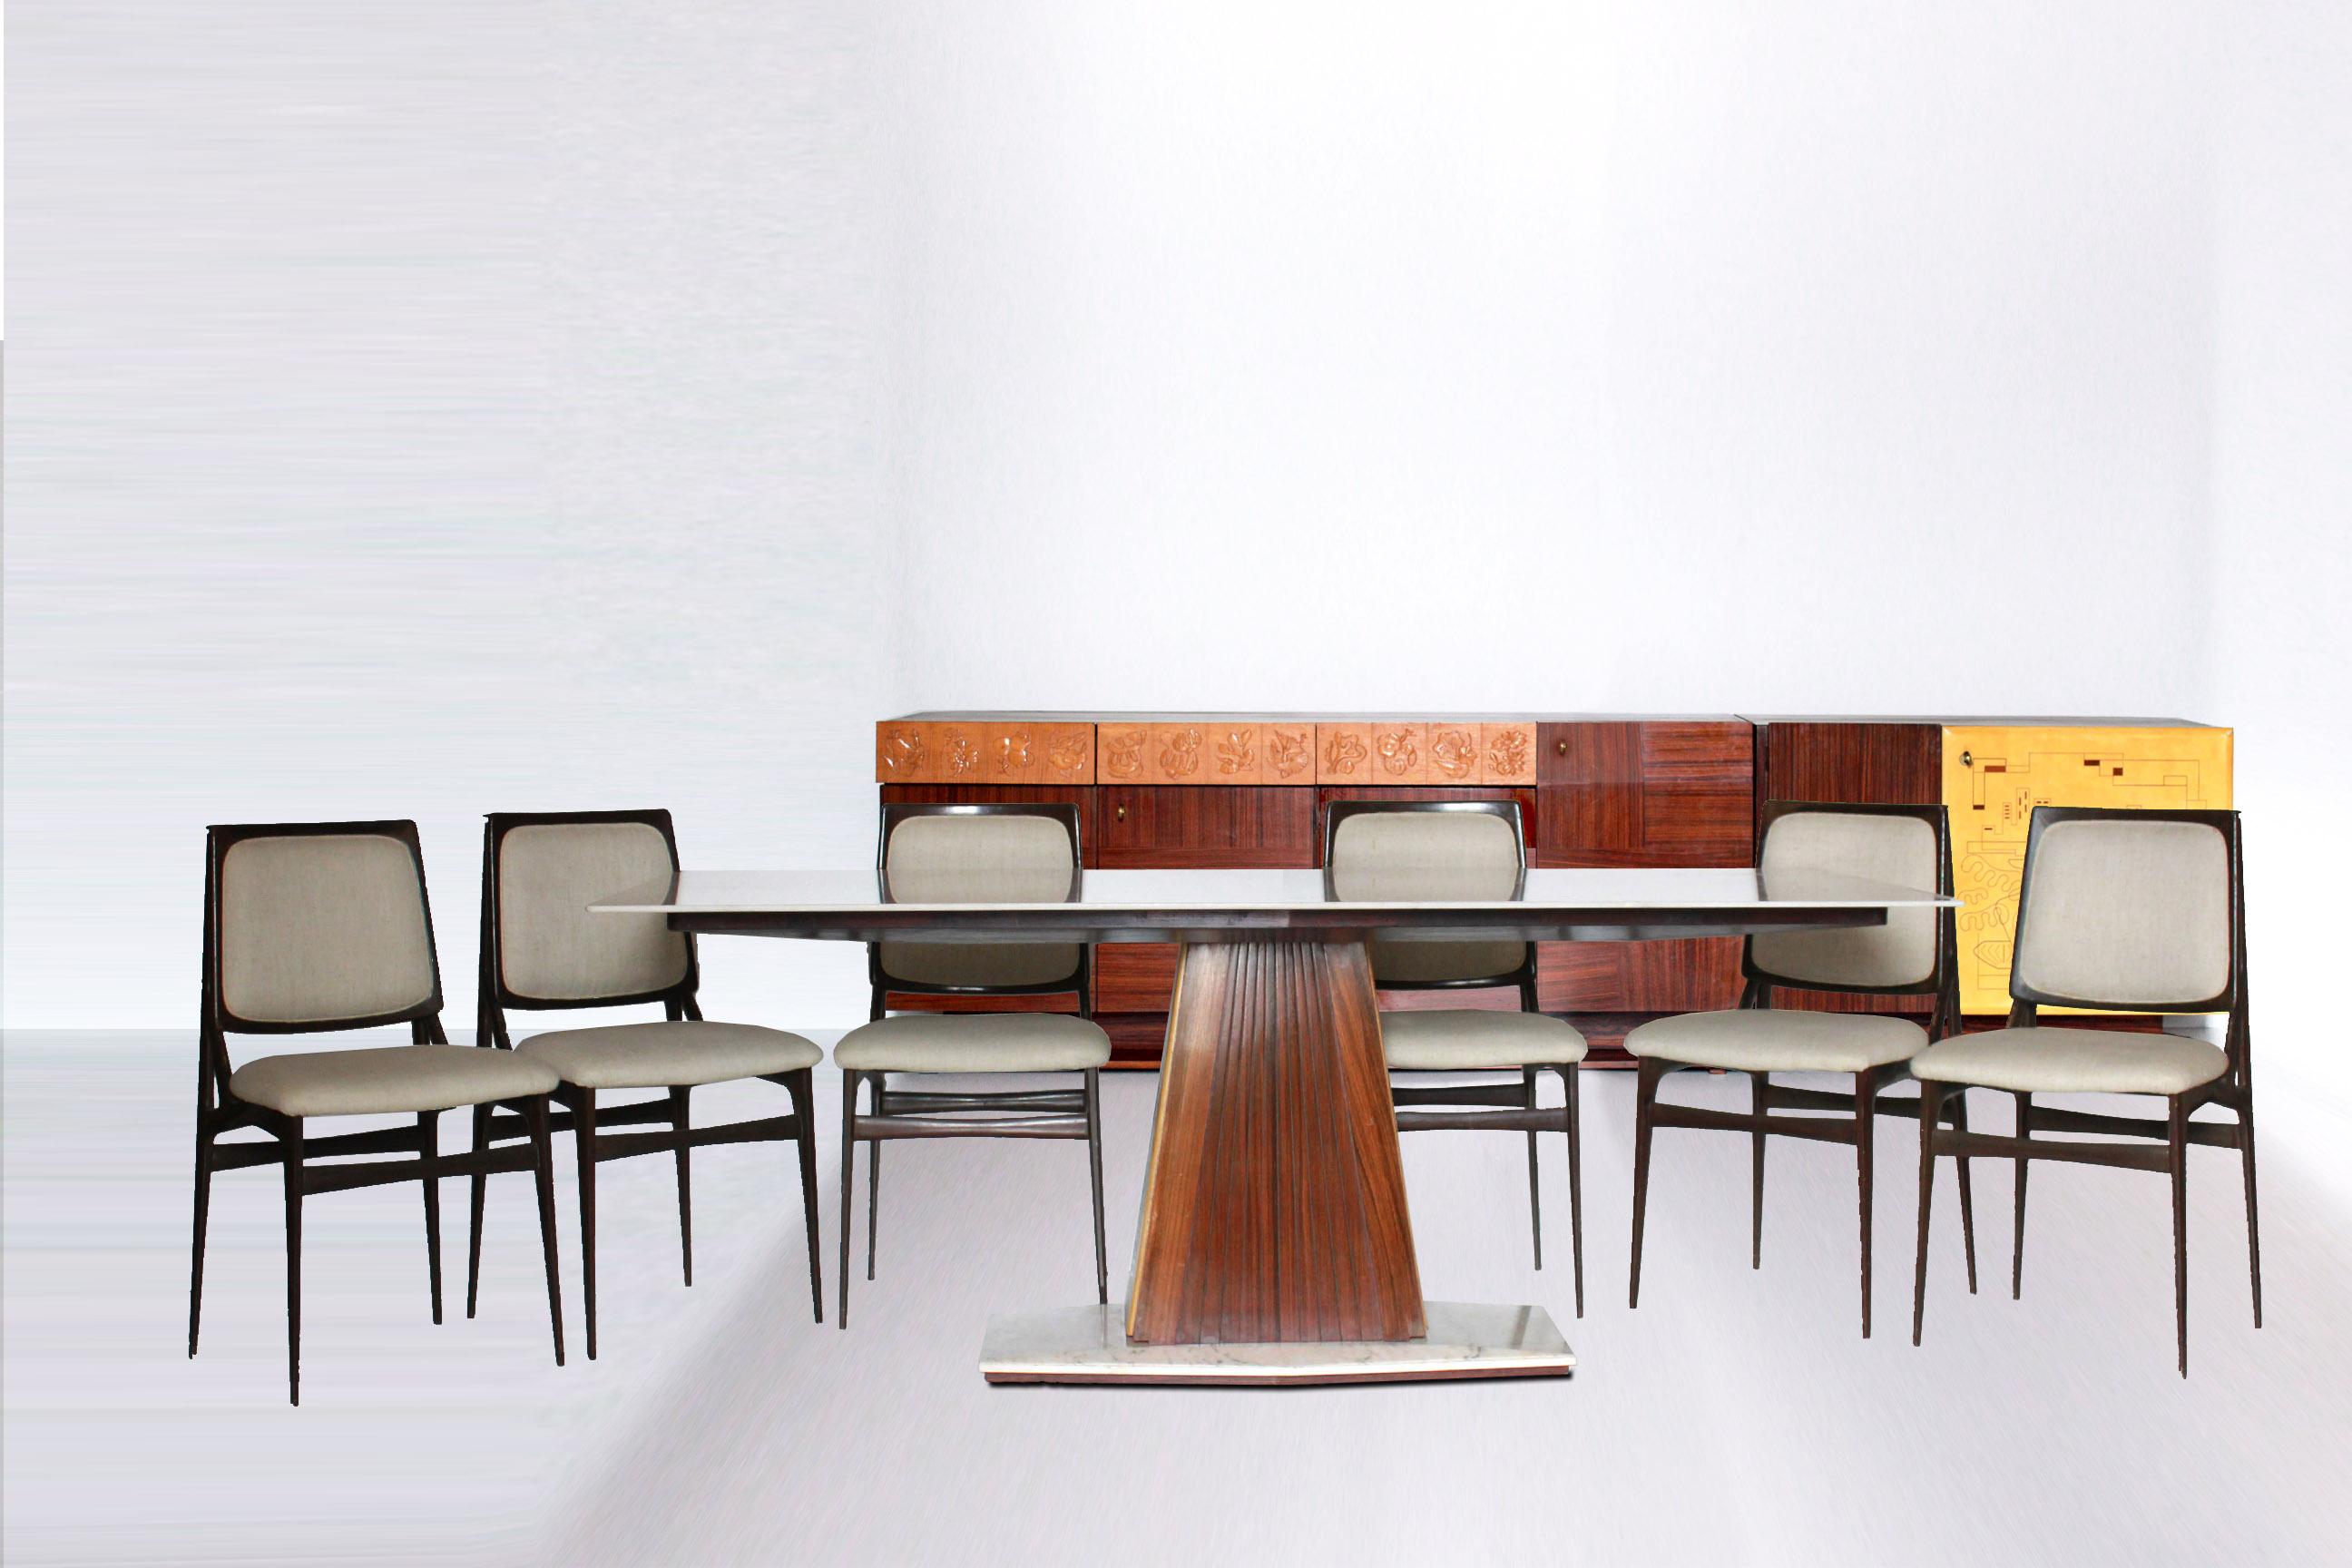 A 1960s vintage dining room set by Vittorio Dassi manufacturer. The set is composed by a dining table with pink marble top and six dining chairs. Wood structure venereed with mahogany wood. In very good conditions with only some signs of time.

All